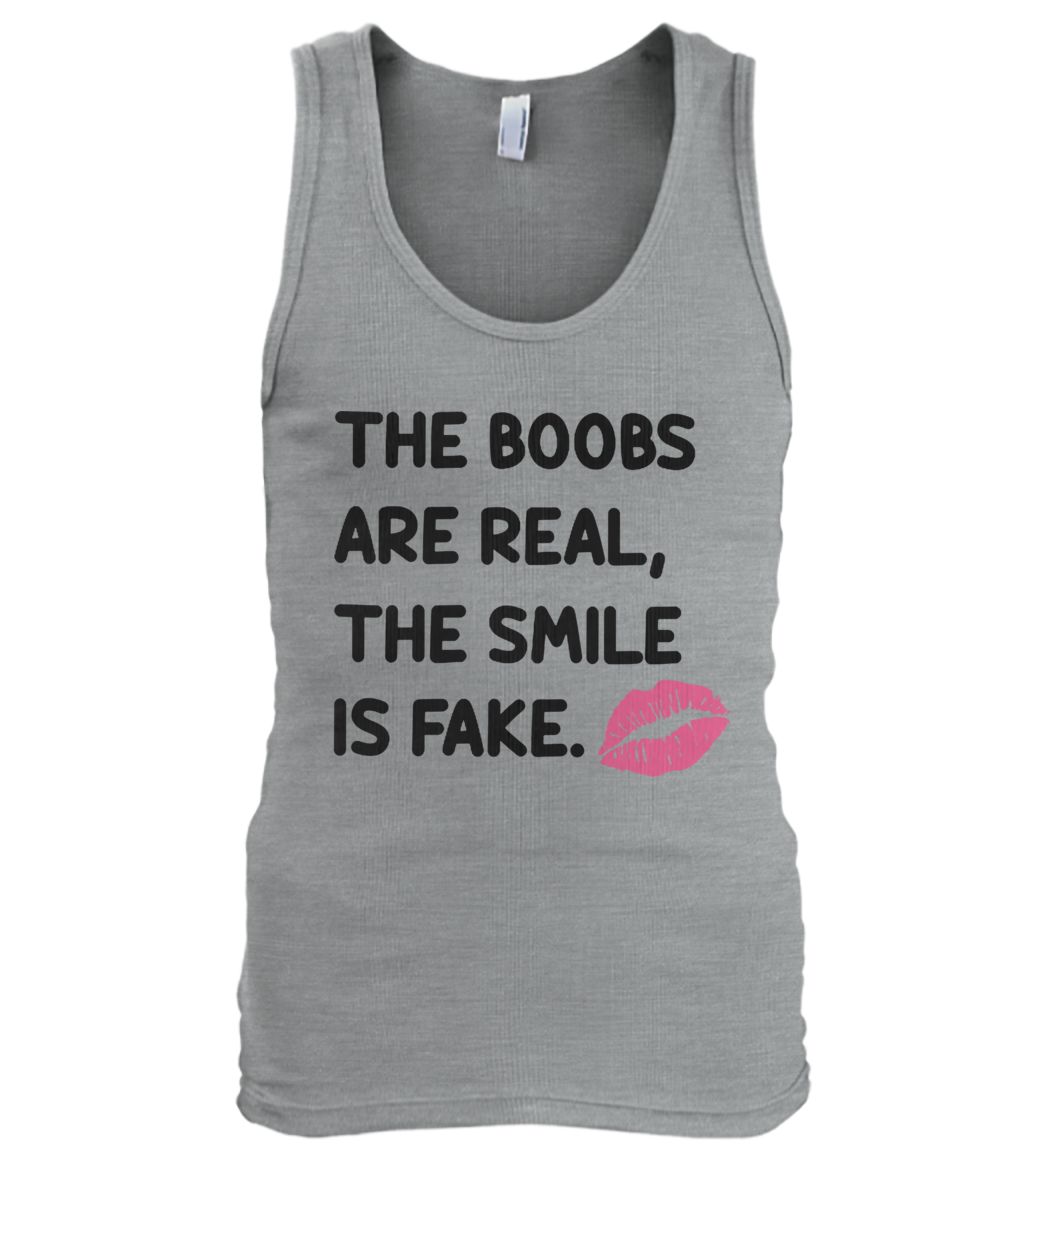 The boobs are real the smile is fake men's tank top